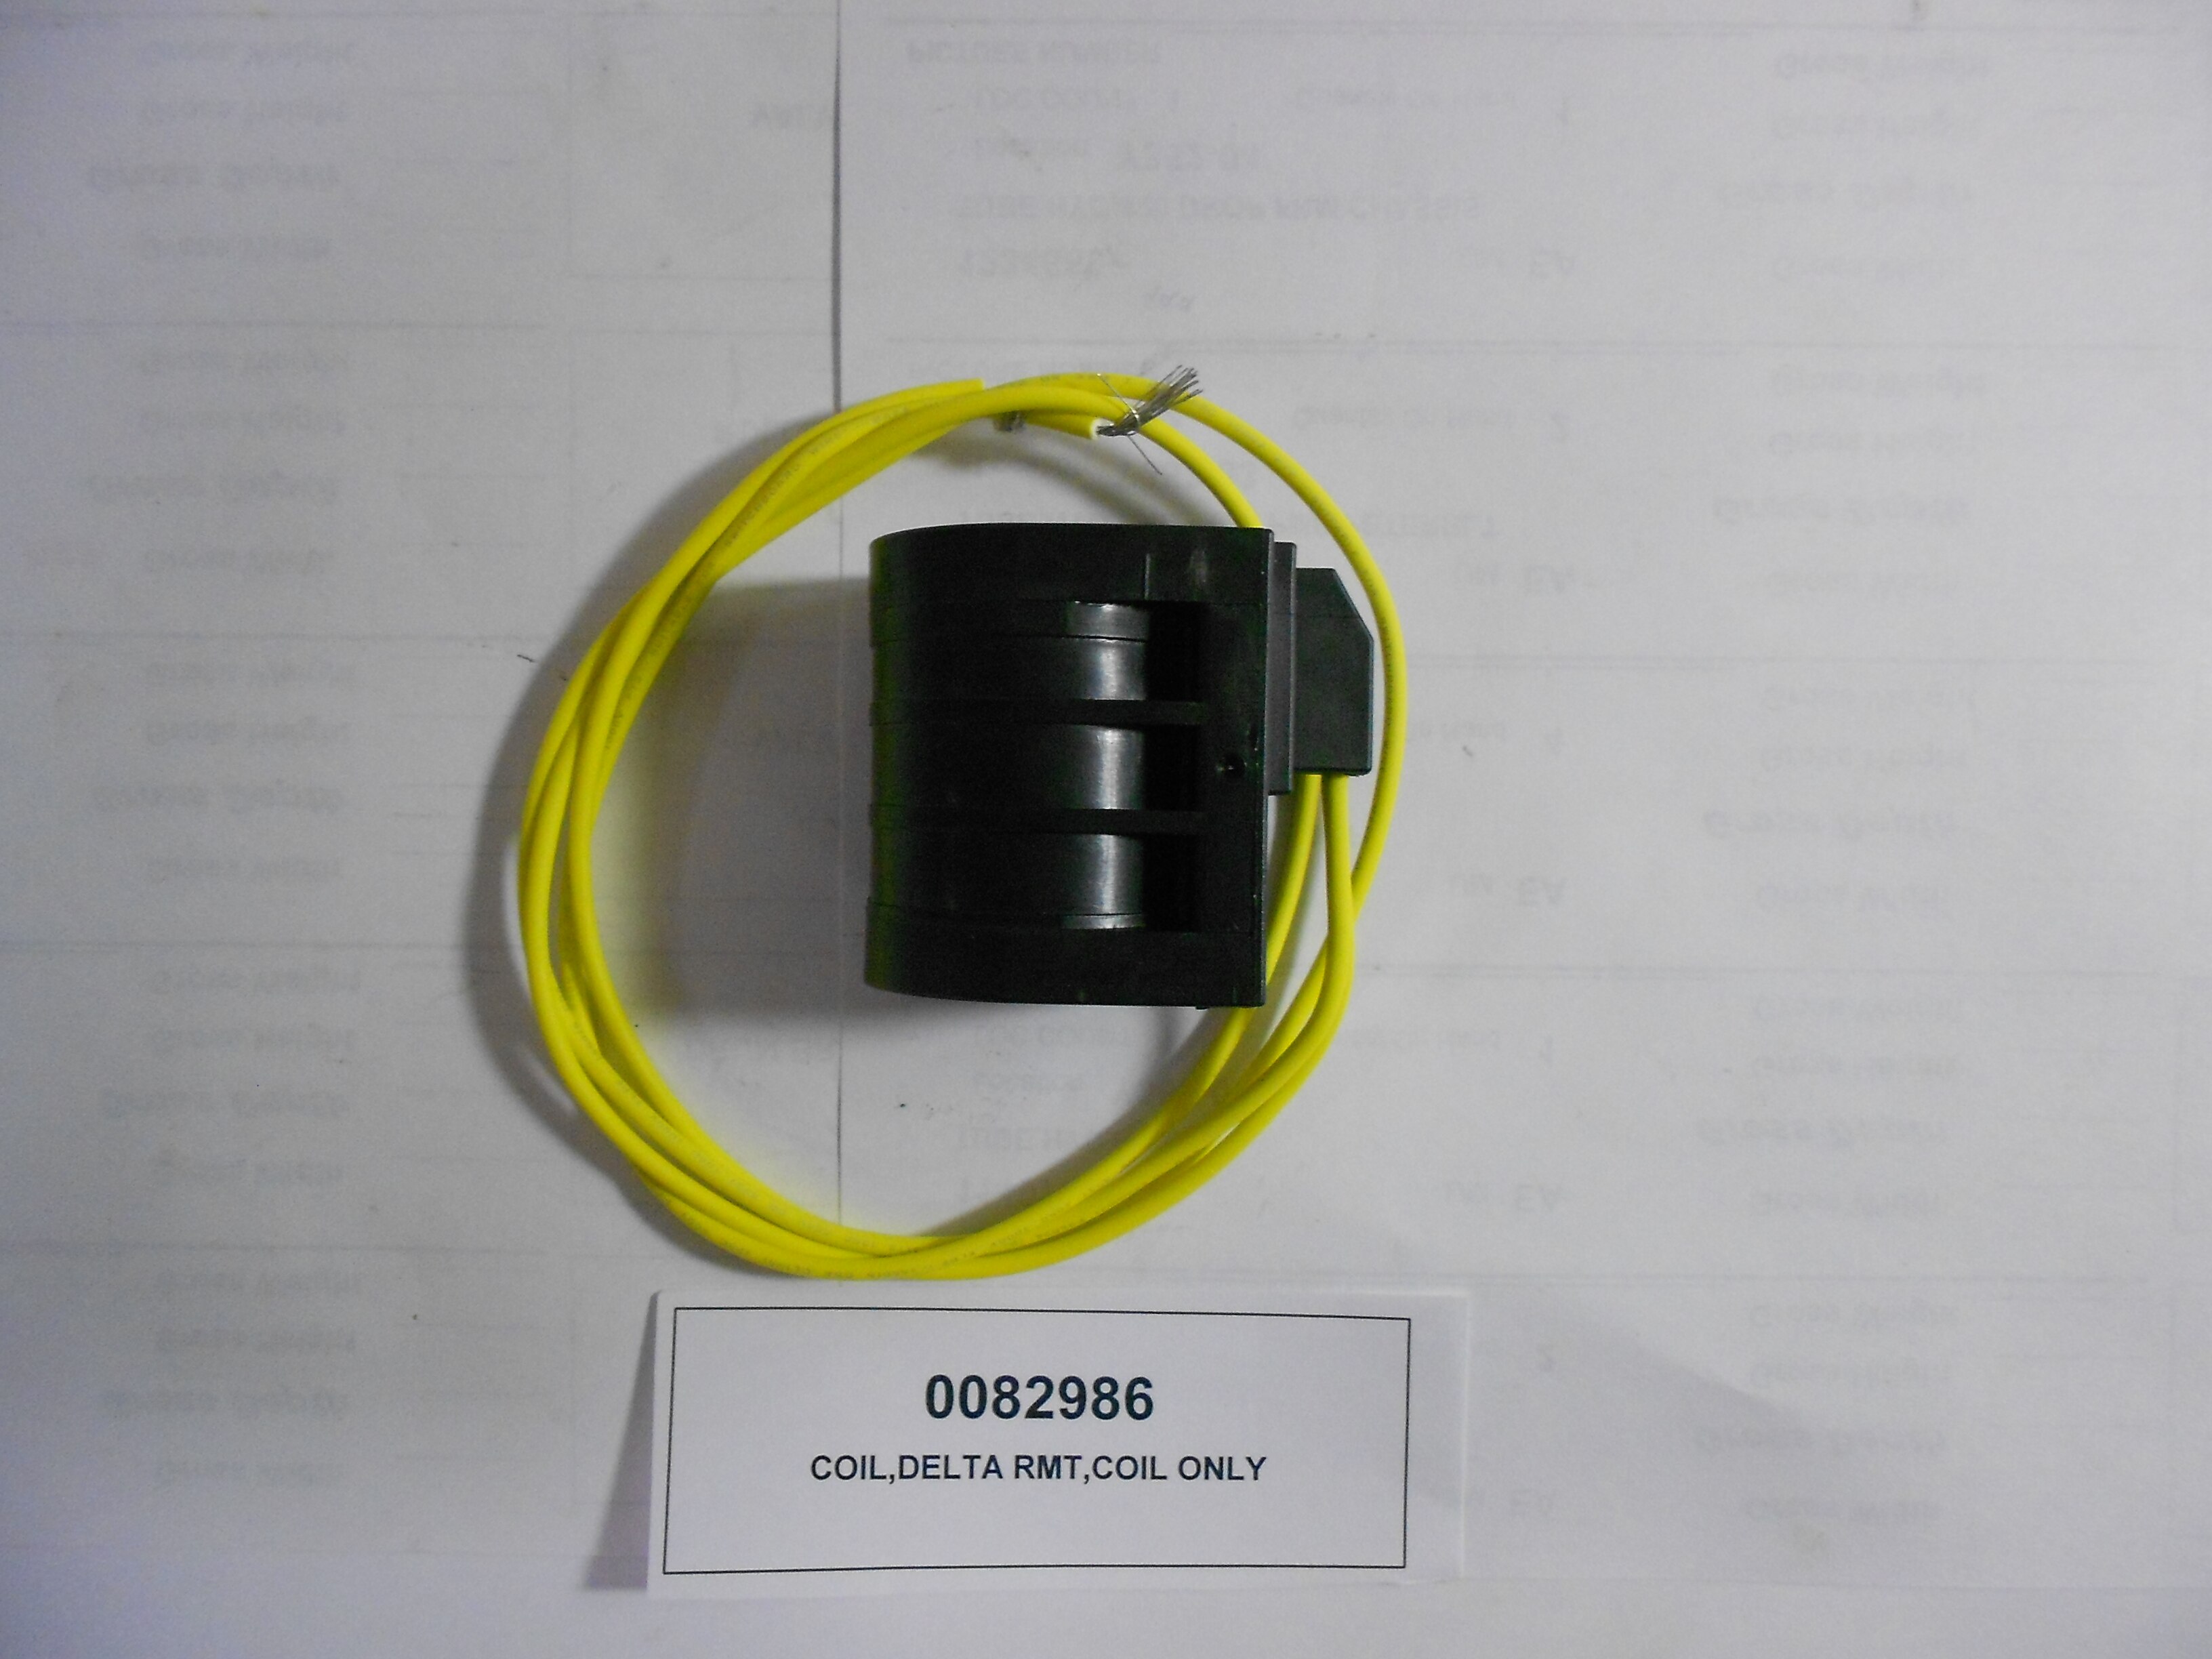 COIL,DELTA RMT,COIL ONLY